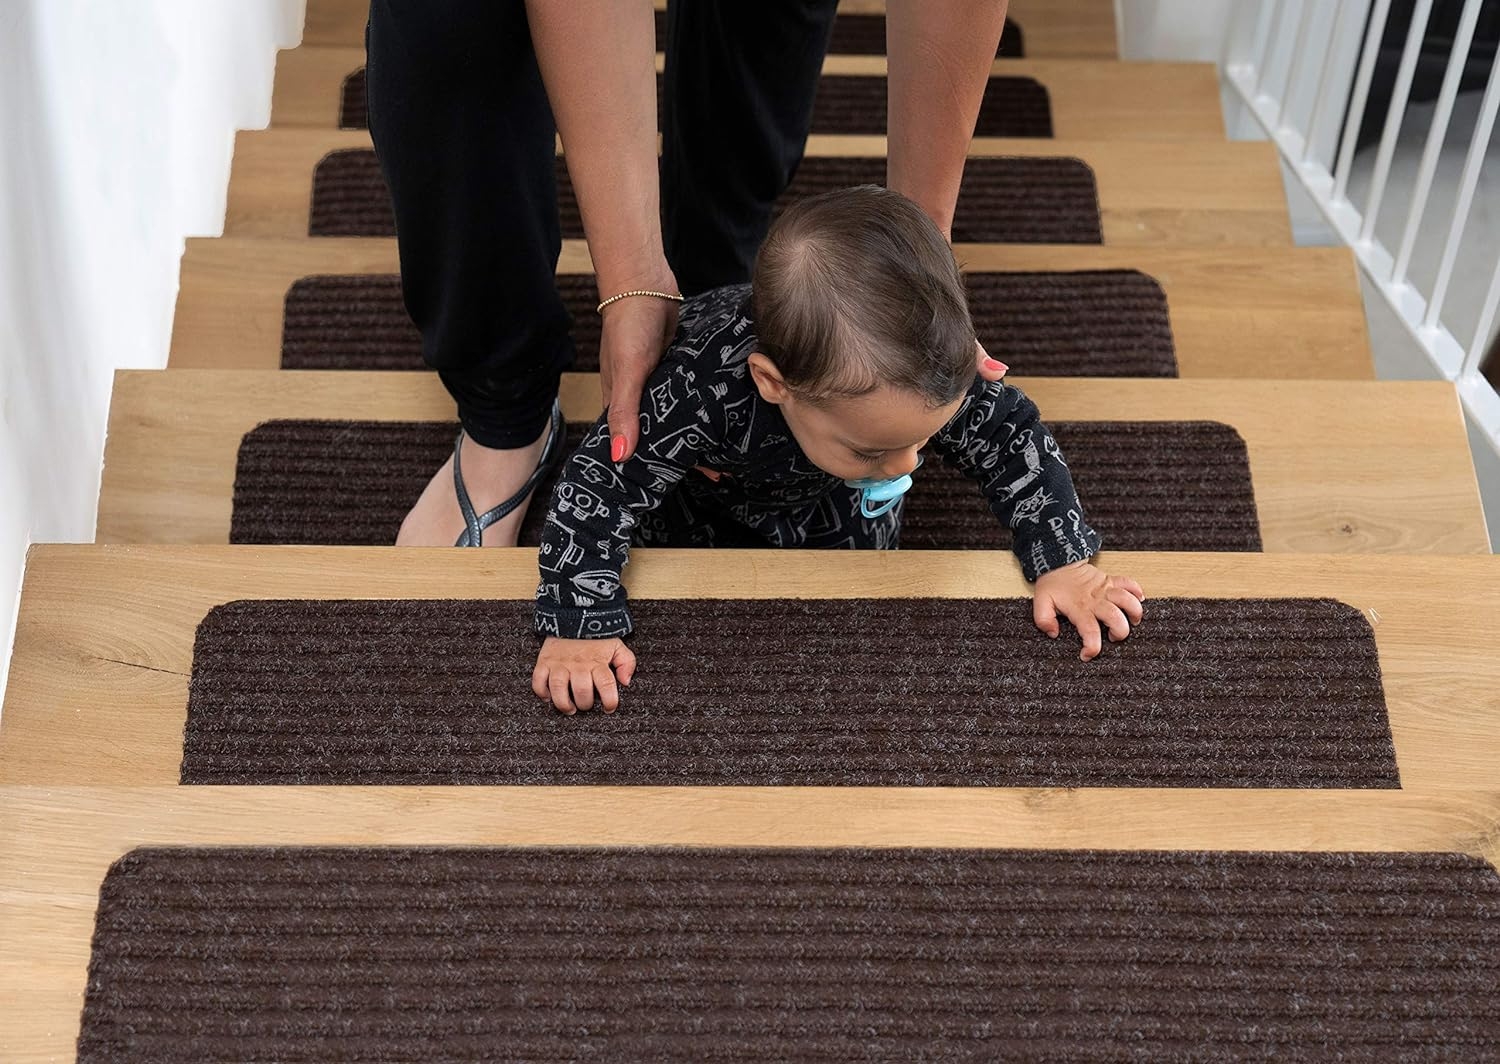 EdenProducts Patent Pending Non Slip Carpet Stair Treads, Set of 2, Rug Non Skid Runner for Grip and Beauty. Safety Slip Resistant for Kids, Elders, and Dogs. 8" X 30", Brown, Pre Applied Adhesive